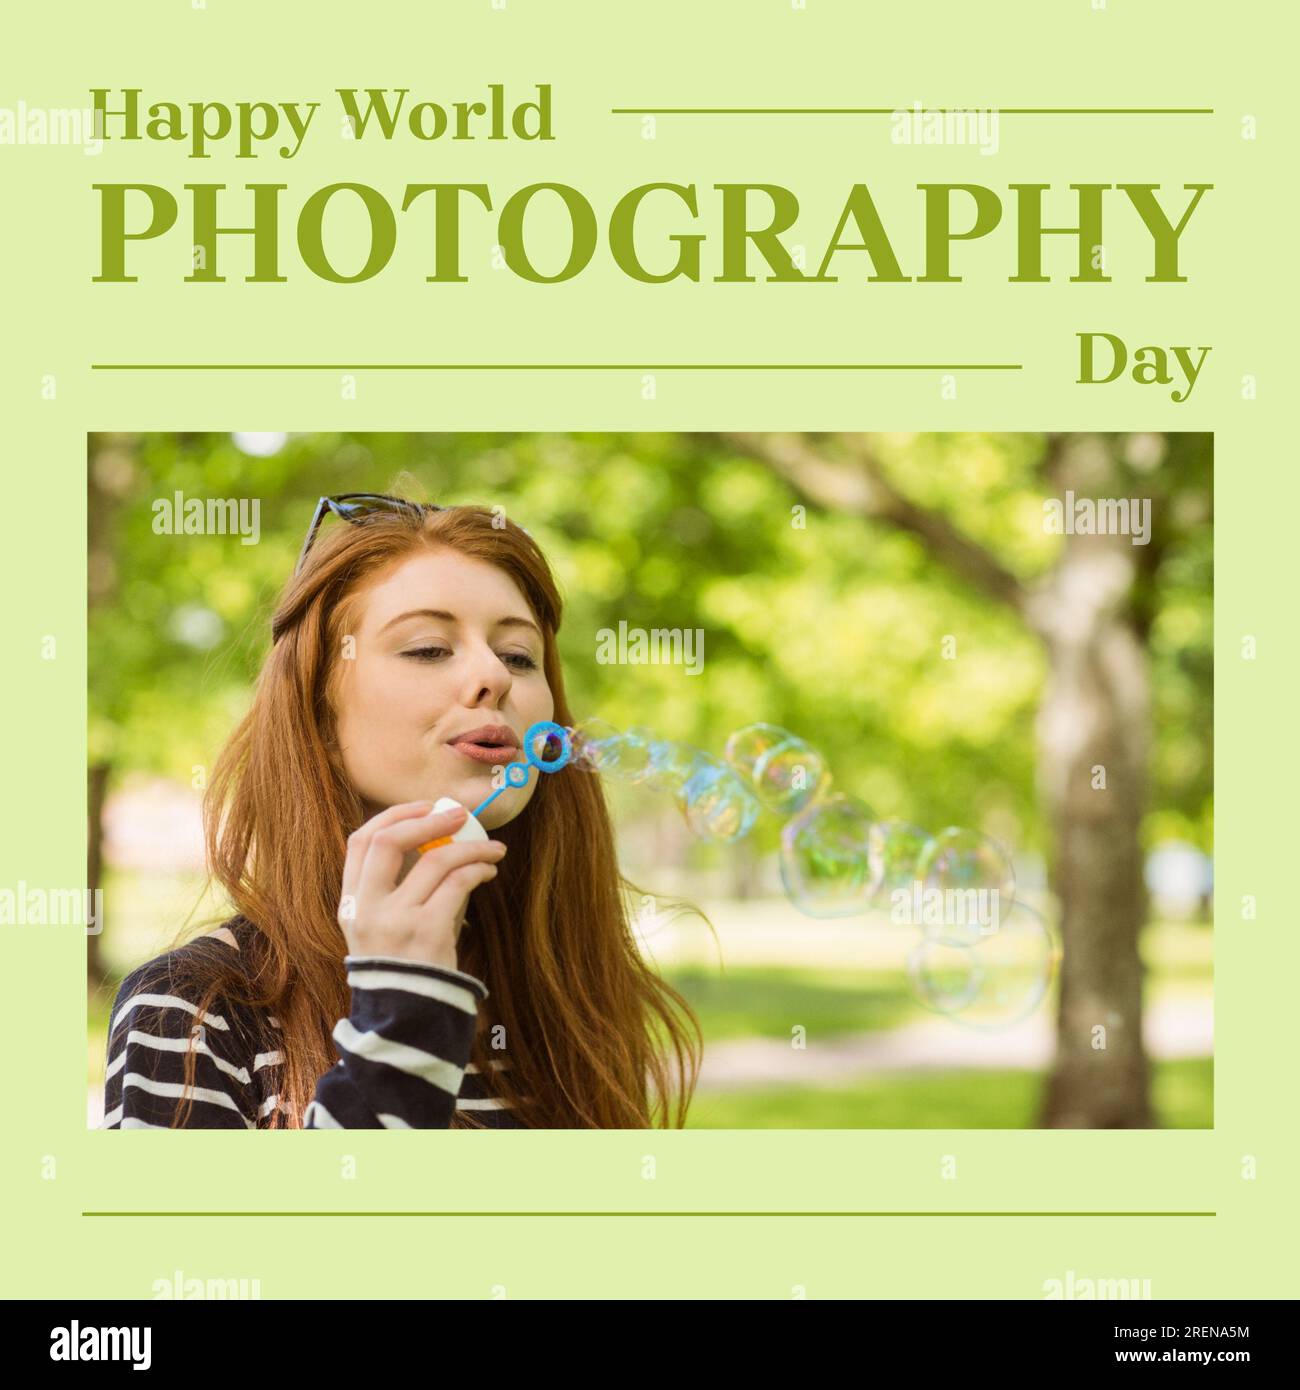 Happy world photography day text on green with happy caucasian woman blowing bubbles in park Stock Photo